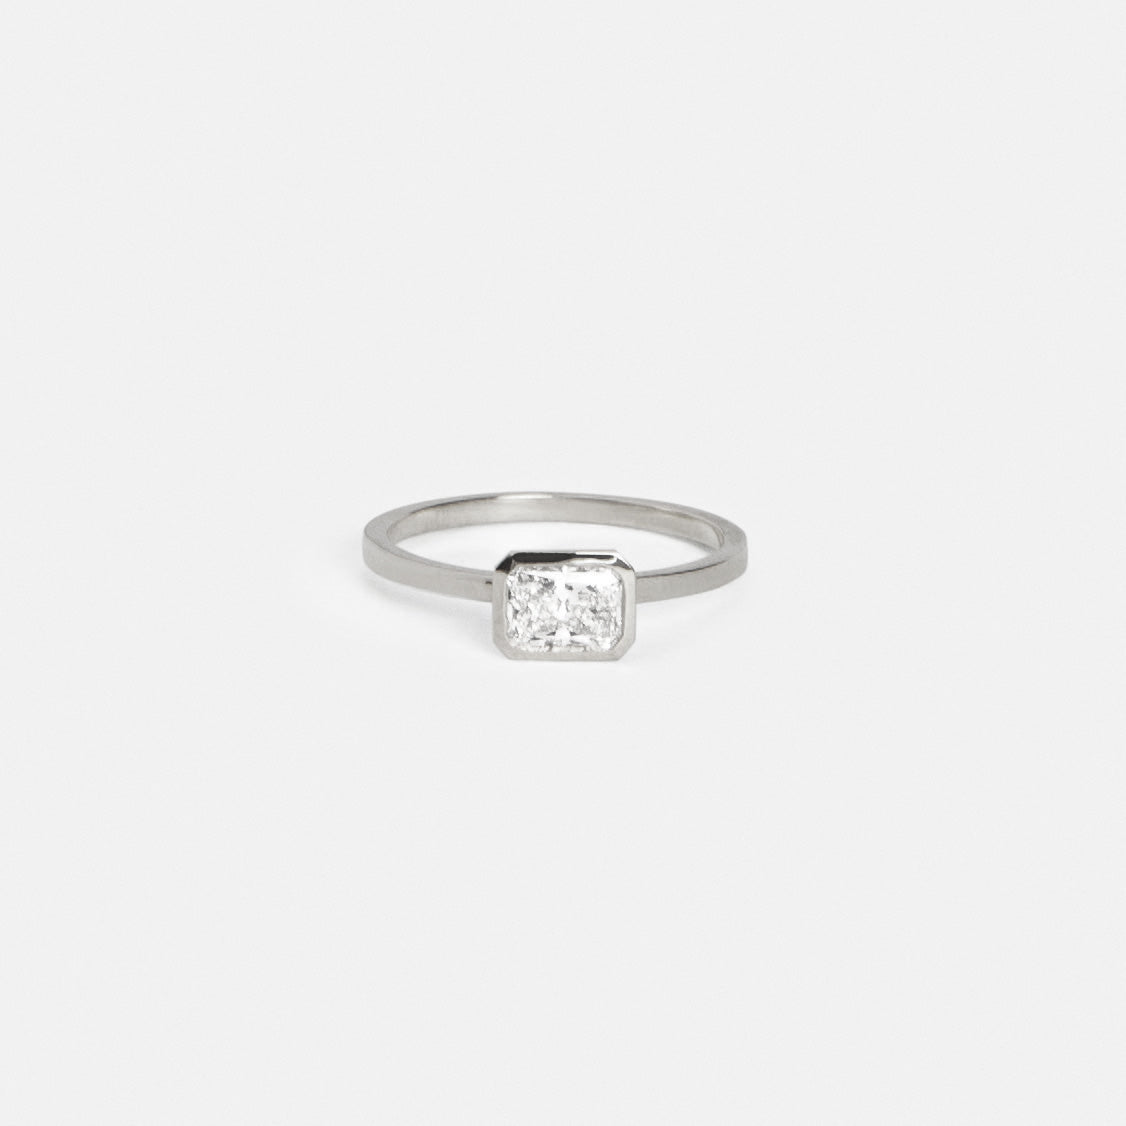 Mudu Alternative Ring in 14k White Gold set with a 0.6ct radiant cut lab-grown diamond By SHW Fine Jewelry NYC